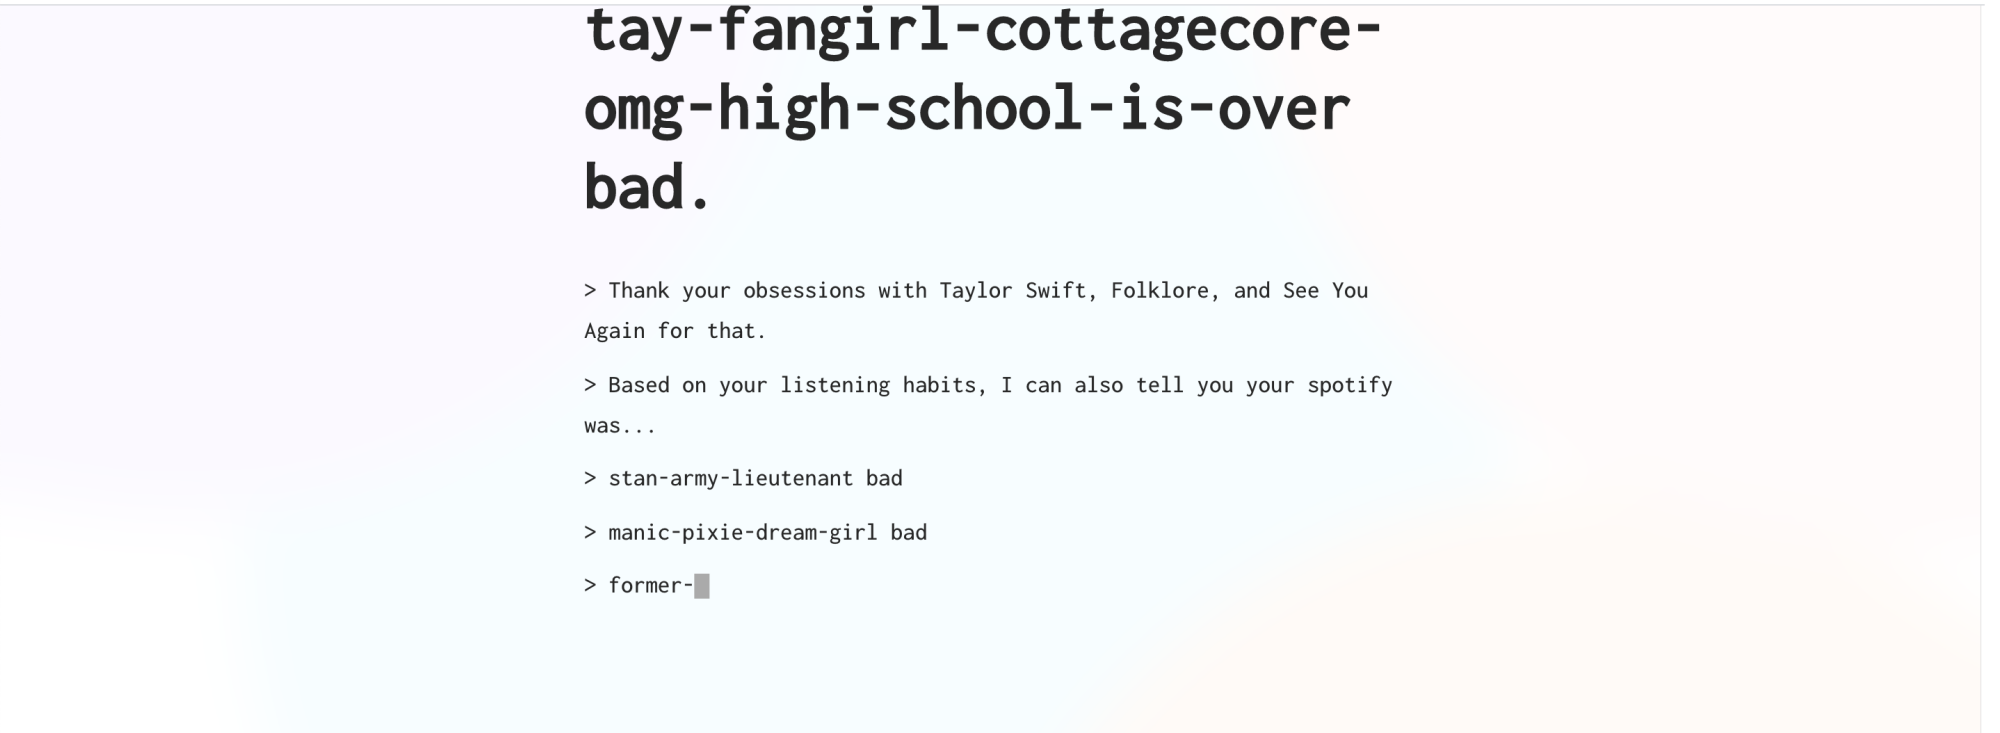 The AI reads us for filth, calling our taste "tay-fancore-cottagecore-omg-high-school-is-over-bad."